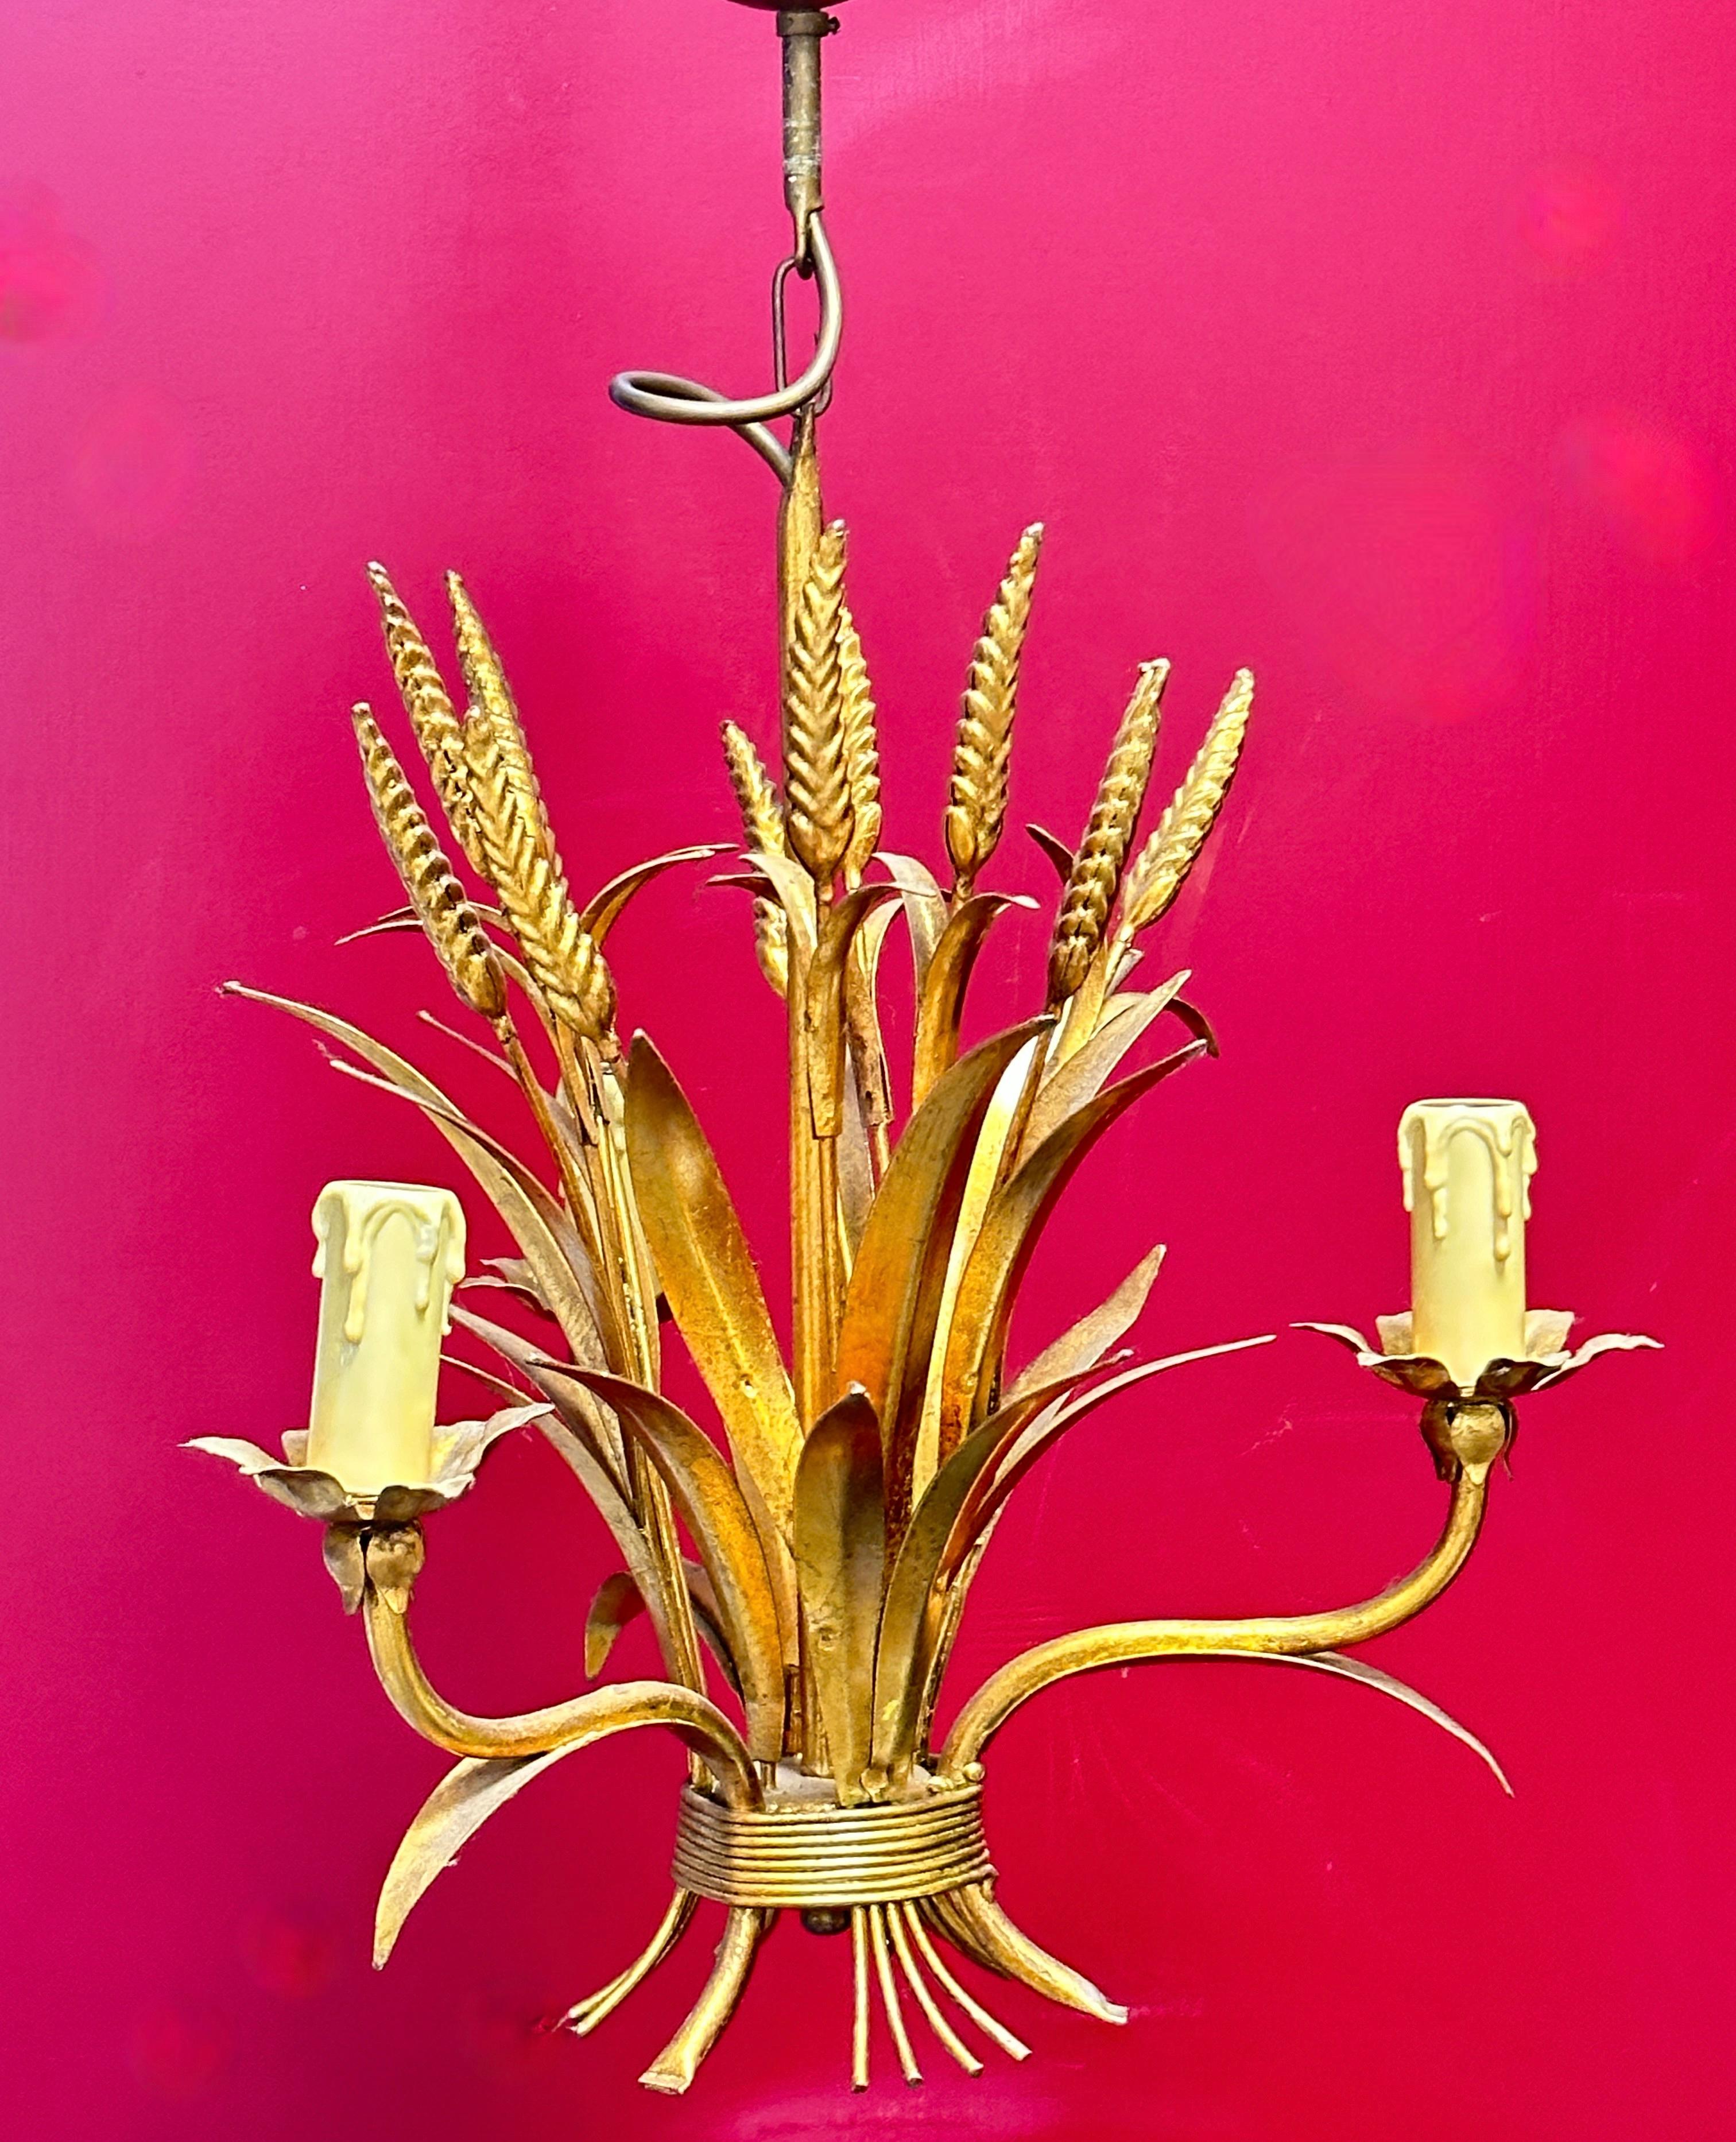 A Hollywood Regency midcentury gilt tole wheat sheaf chandelier in Coco Chanel Style, the fixture requires three European E14 candelabra bulbs, each bulb up to 40 watts. This light has a beautiful patina and gives each room an eclectic statement.